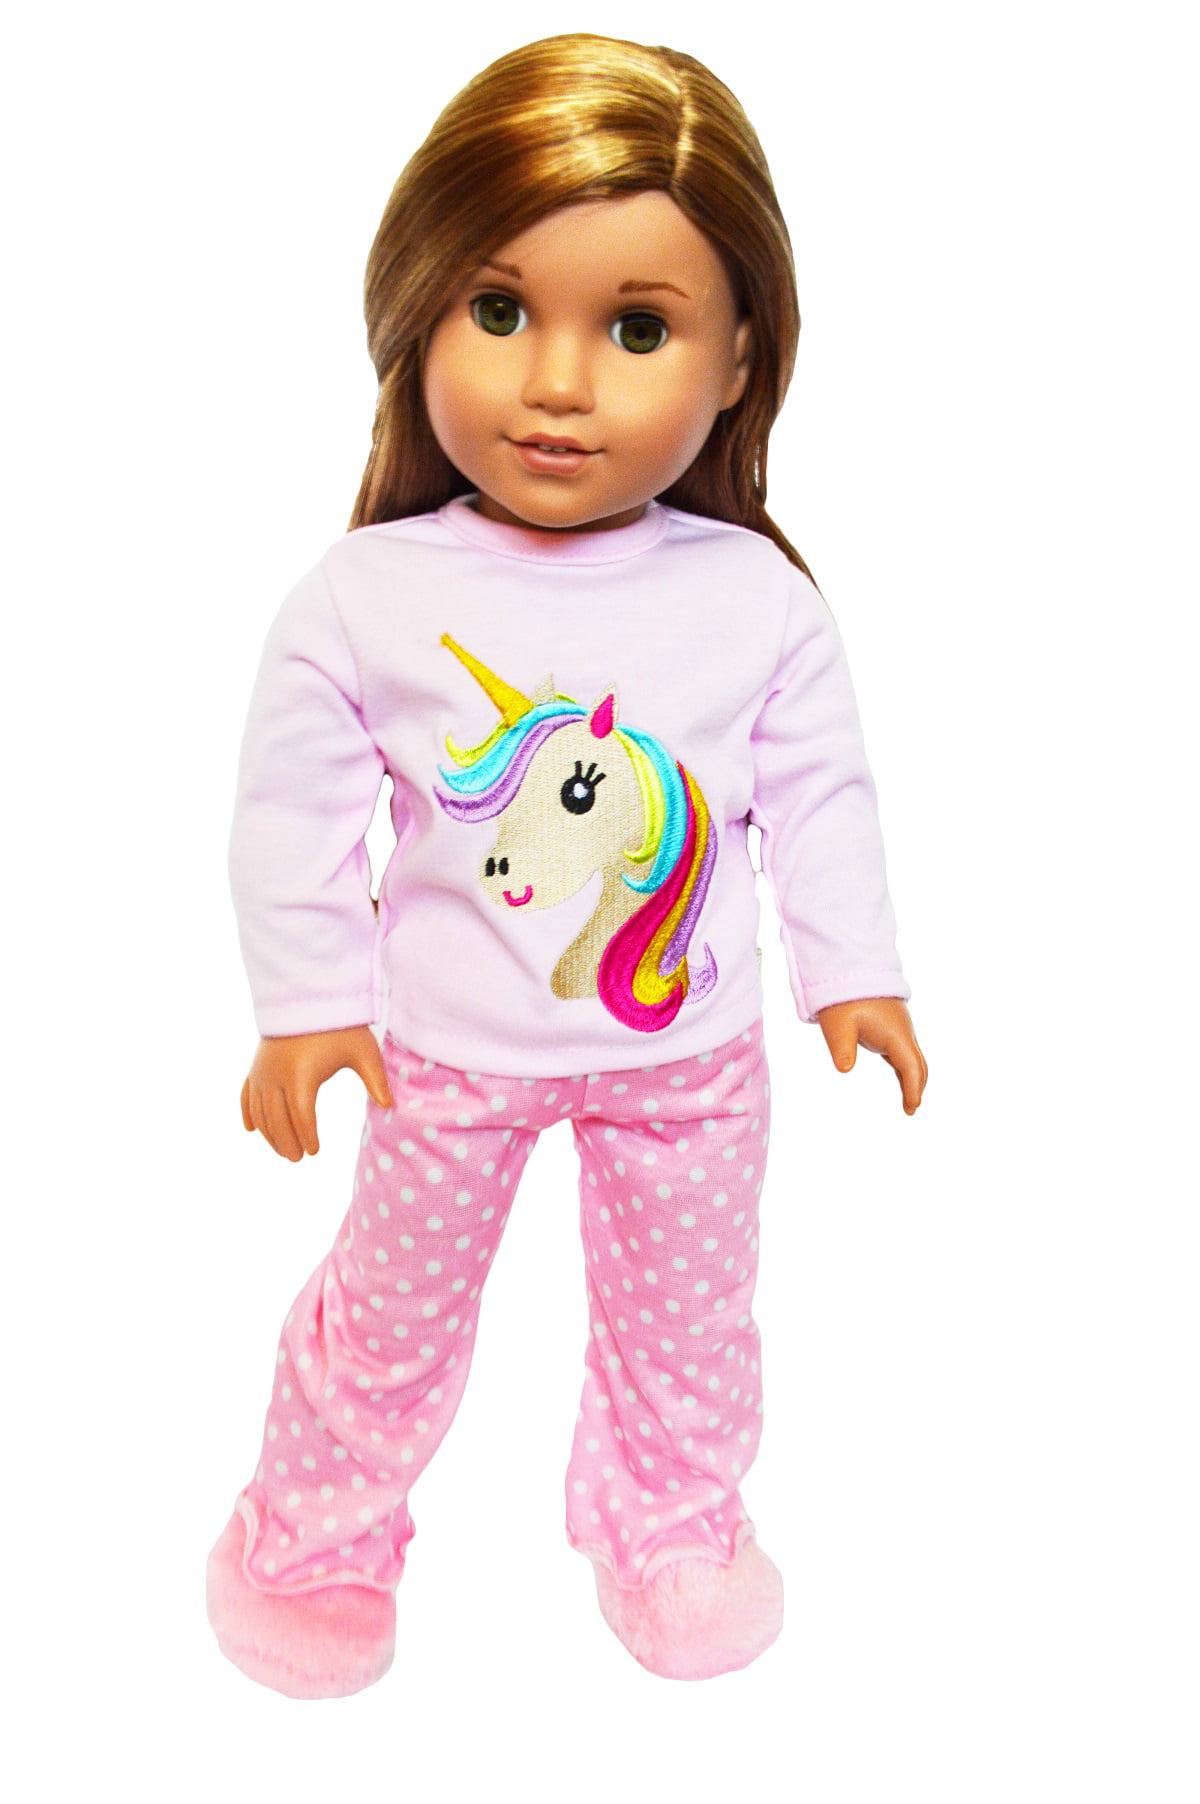 Unicorn Pajamas for American Girl Dolls Clothes 18 Inch Doll Clothes 